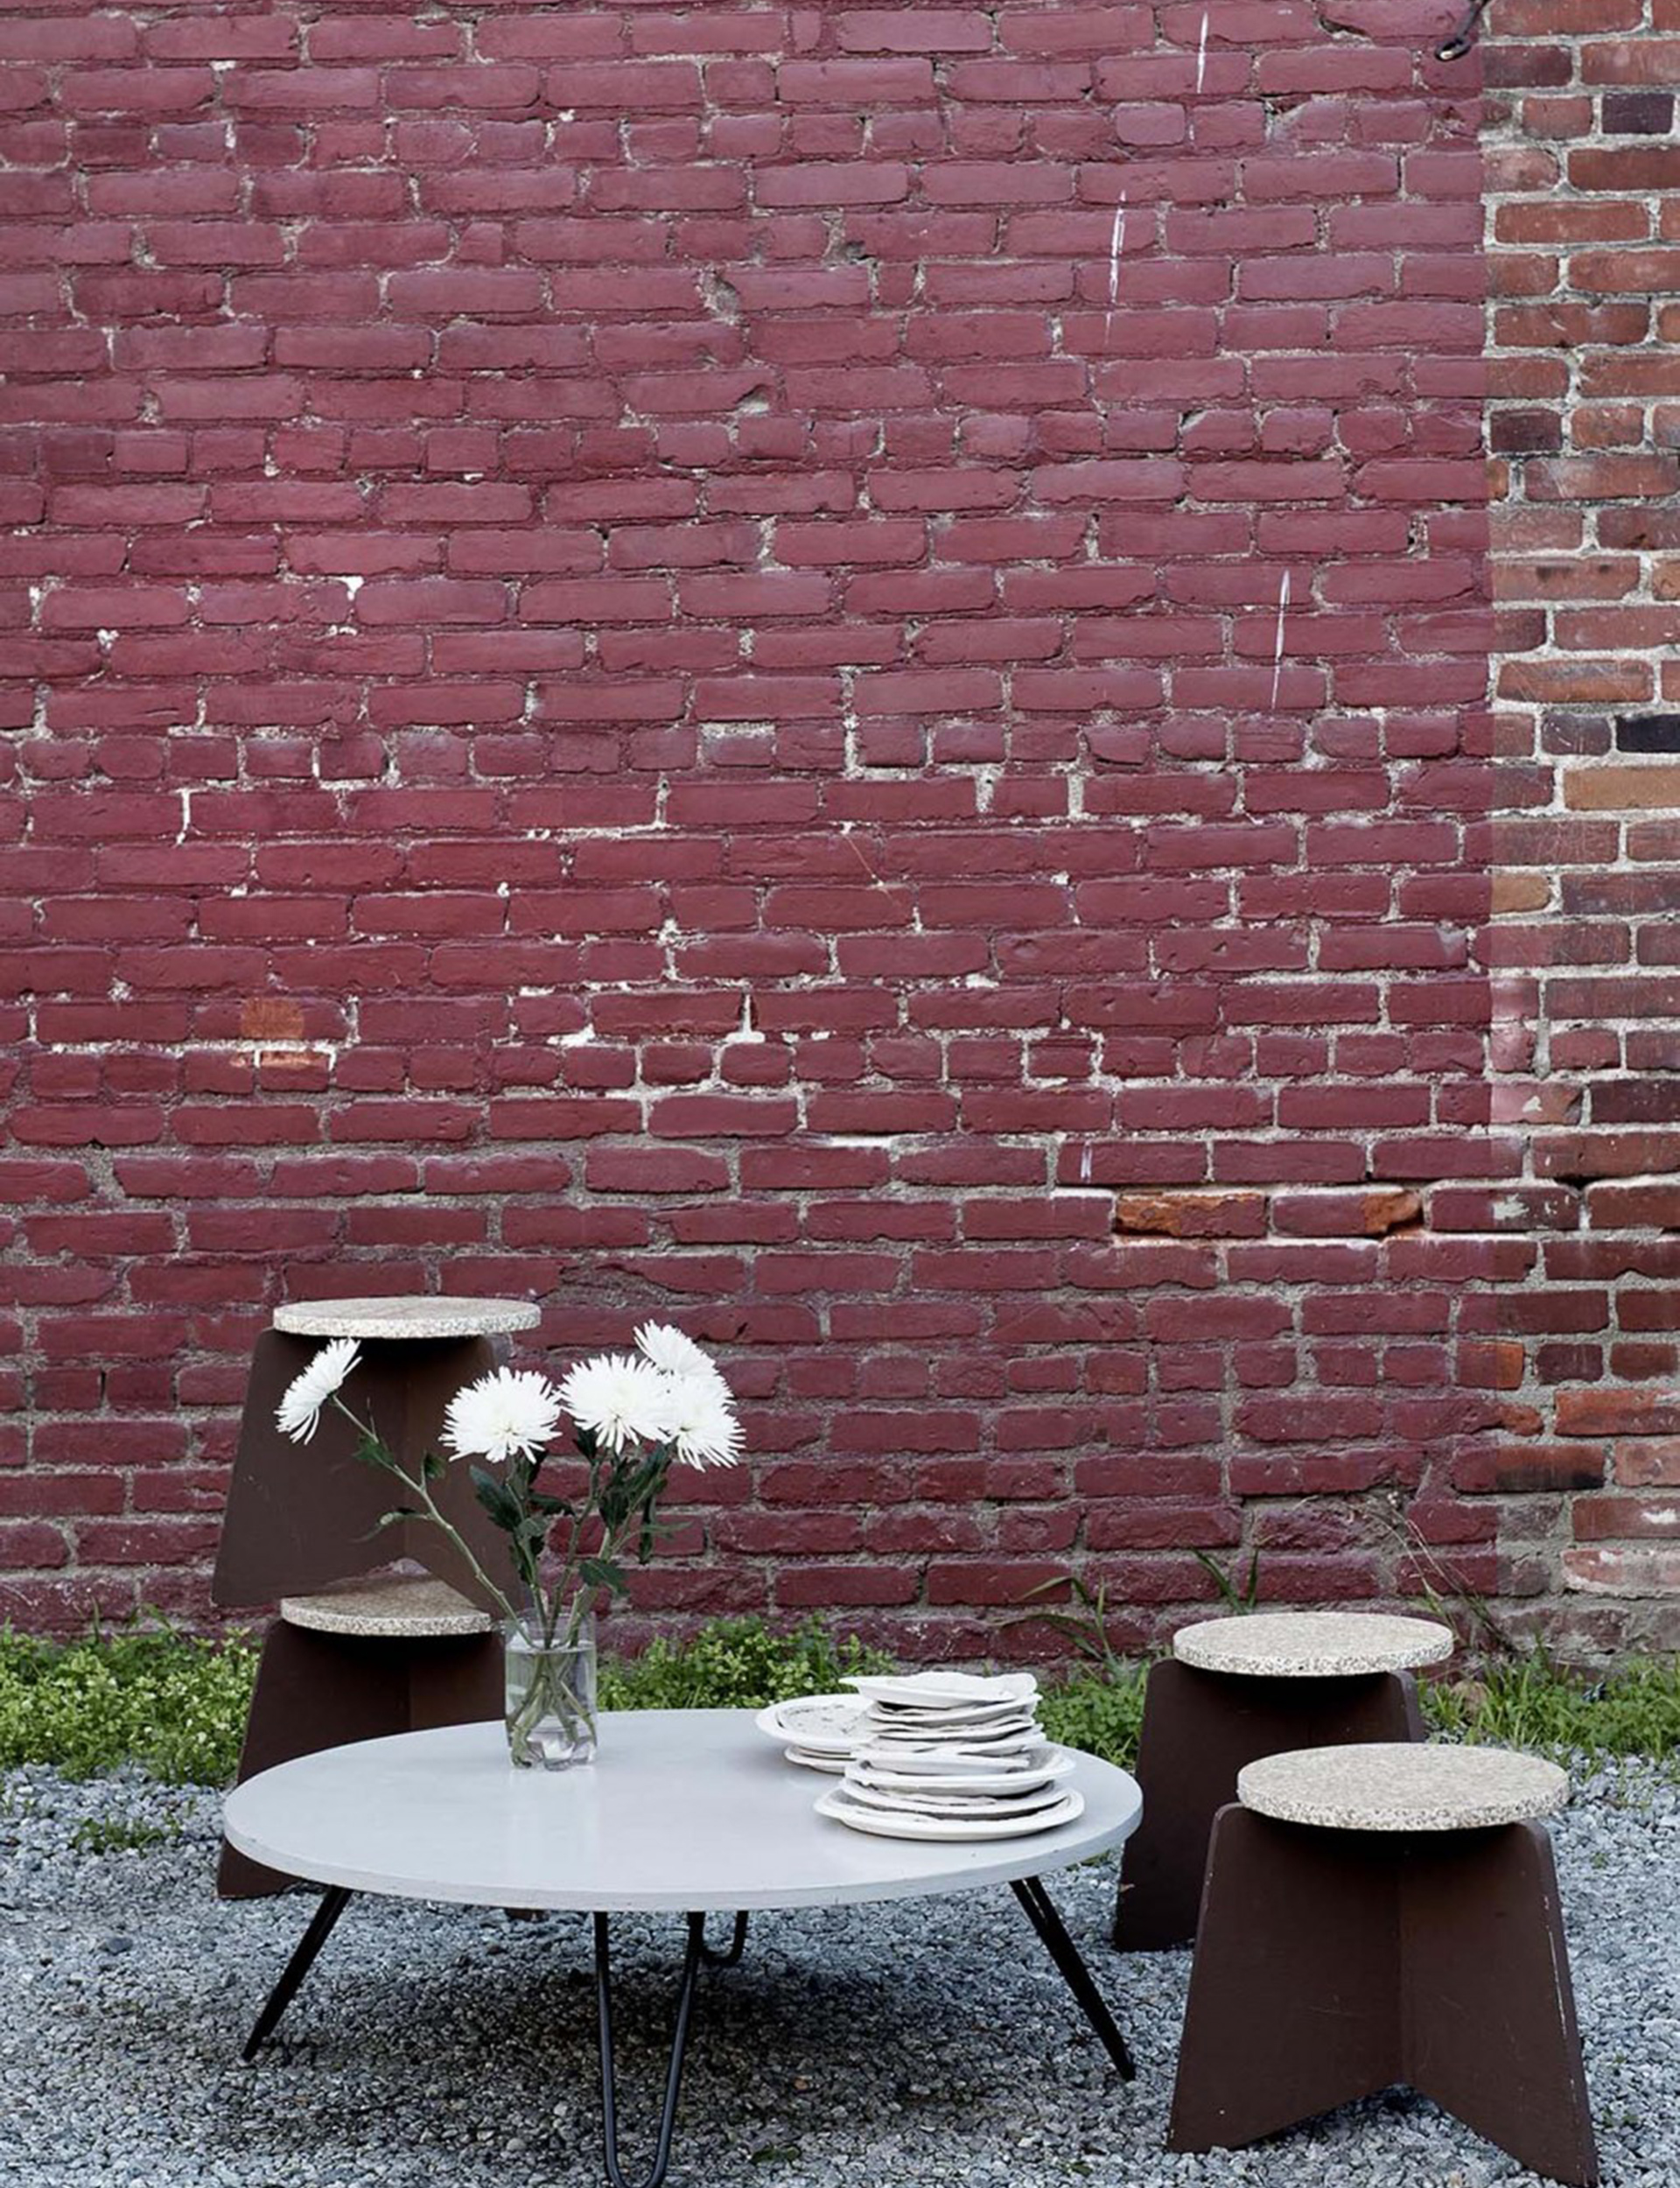 A reproduction of Richard Neutra's studio table and stools made by Connor are set up in the back yard.